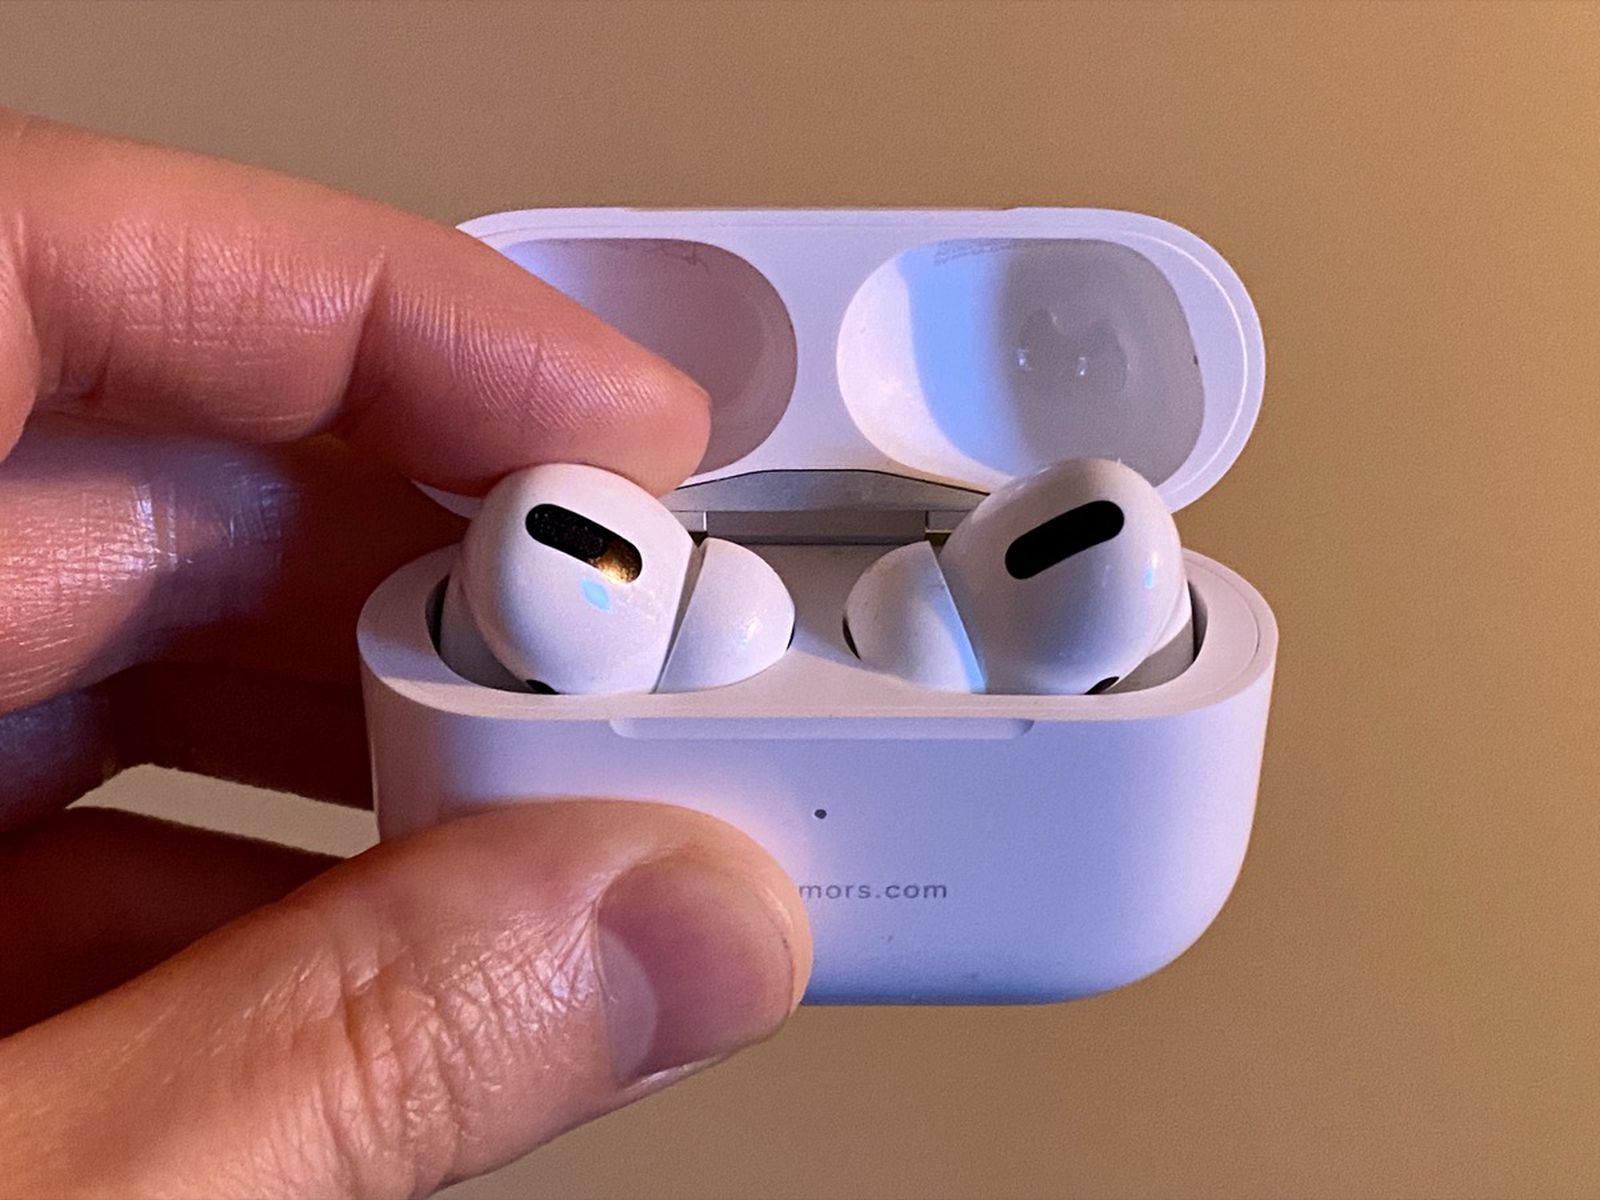 Iphone airpods 1. Apple AIRPODS Pro 1. Эппл аирподс 3. Iphone AIRPODS 3 Pro. Наушники беспроводные Apple AIRPODS 4 Pro.